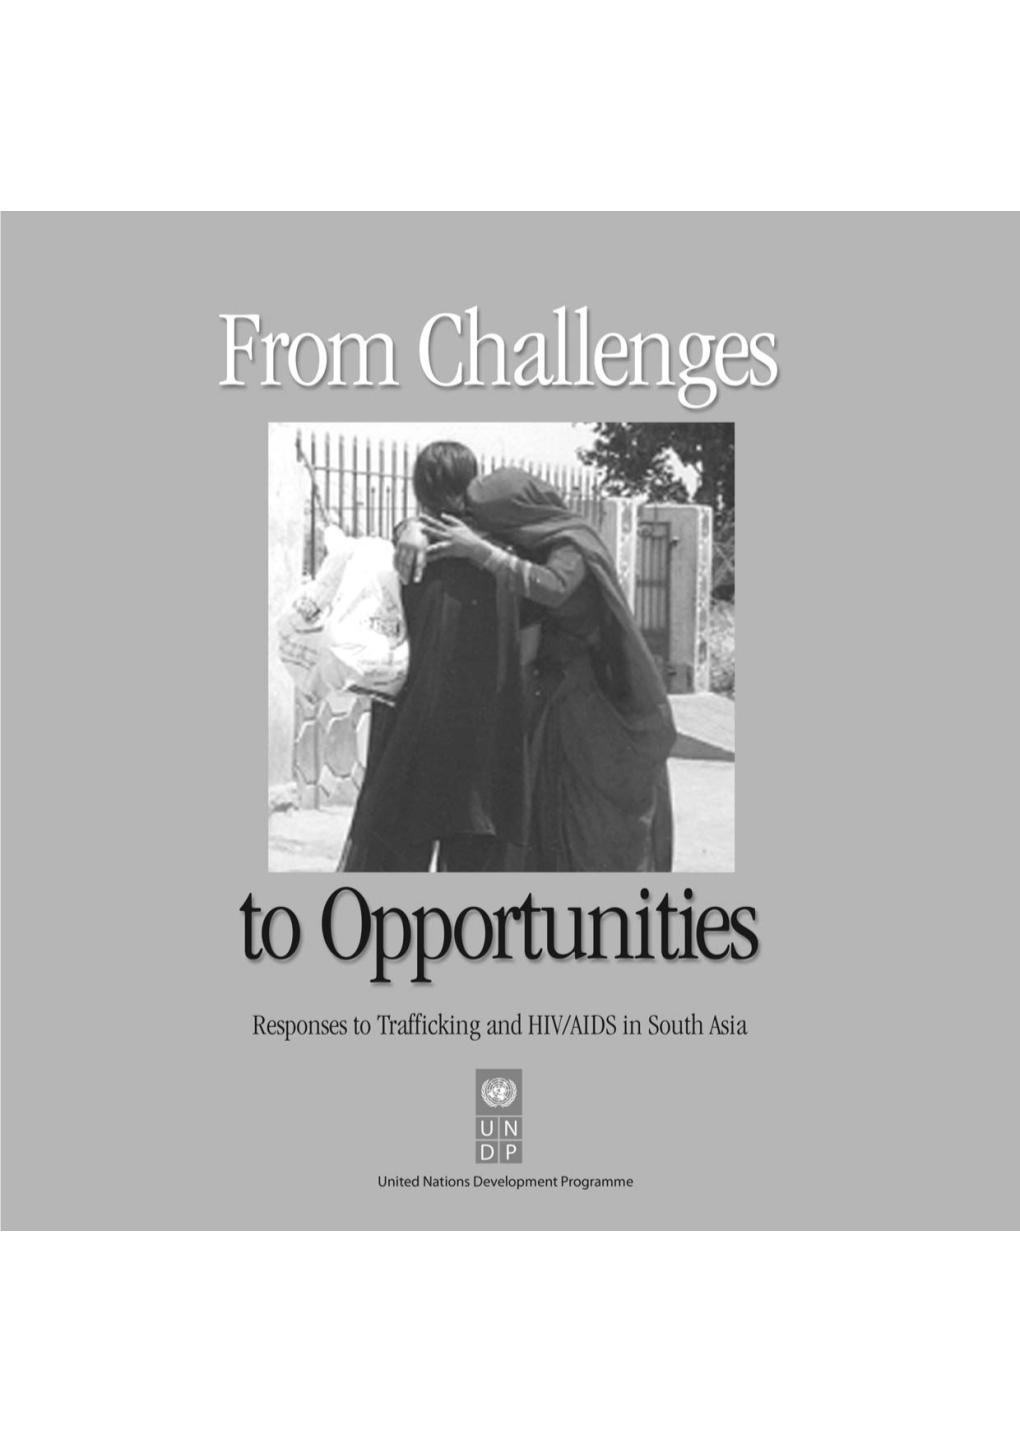 From Challenges to Opportunities: Responses to Trafficking and HIV